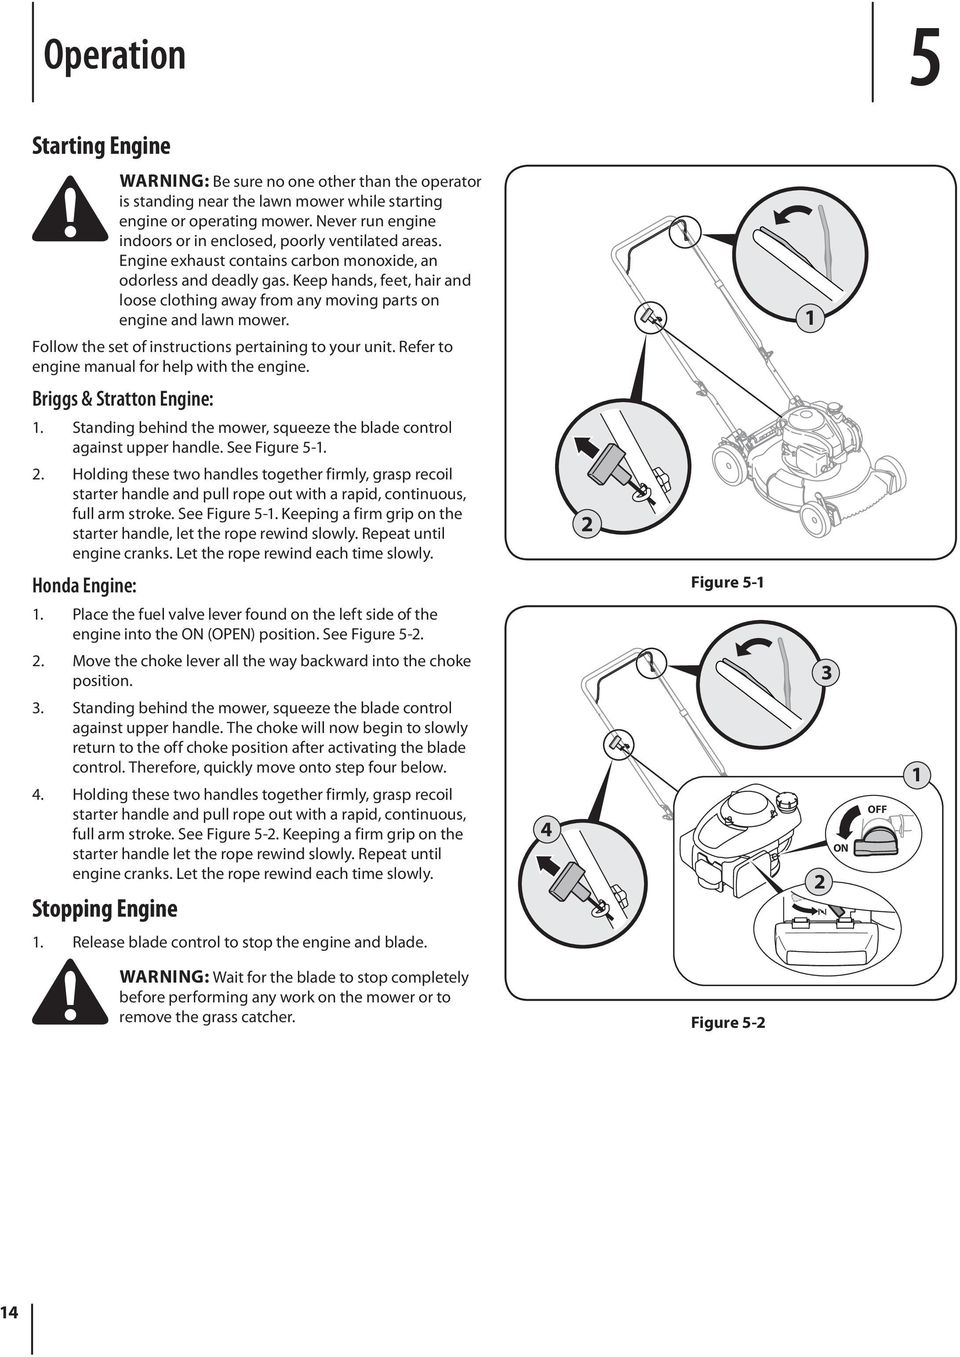 Keep hands, feet, hair and loose clothing away from any moving parts on engine and lawn mower. 1 Follow the set of instructions pertaining to your unit.